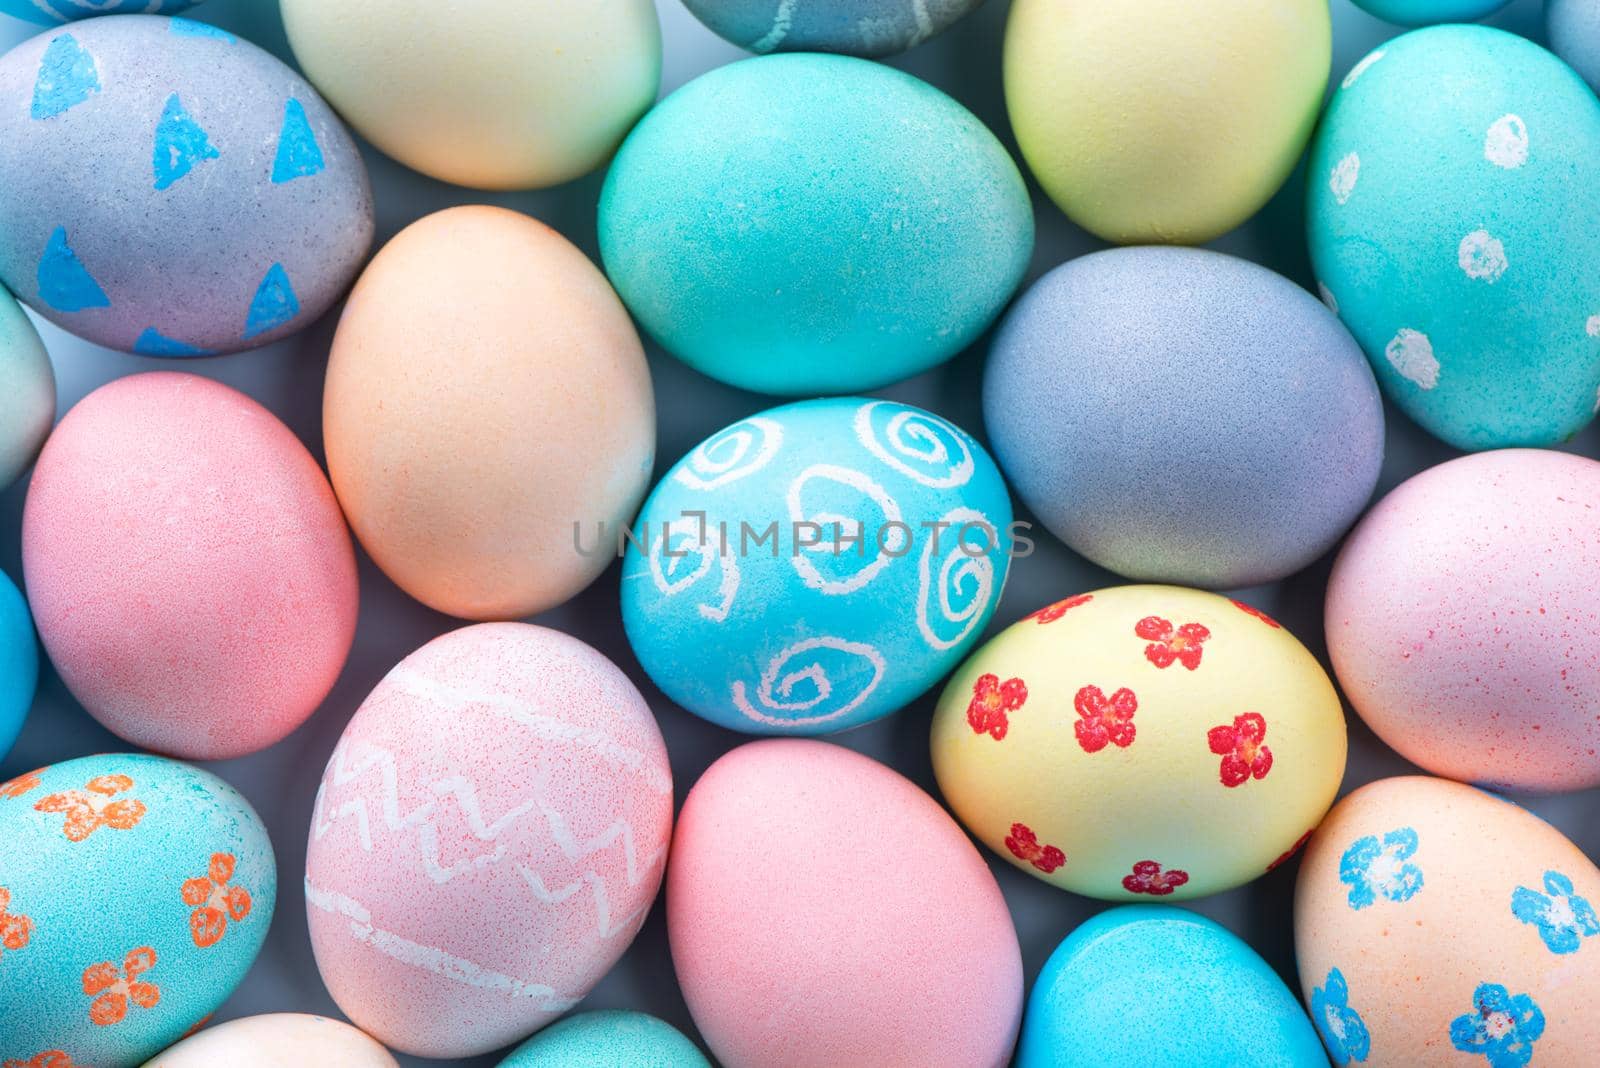 Colorful Easter eggs dyed by colored water with beautiful pattern on a pale blue background, design concept of holiday activity, top view, full frame. by ROMIXIMAGE